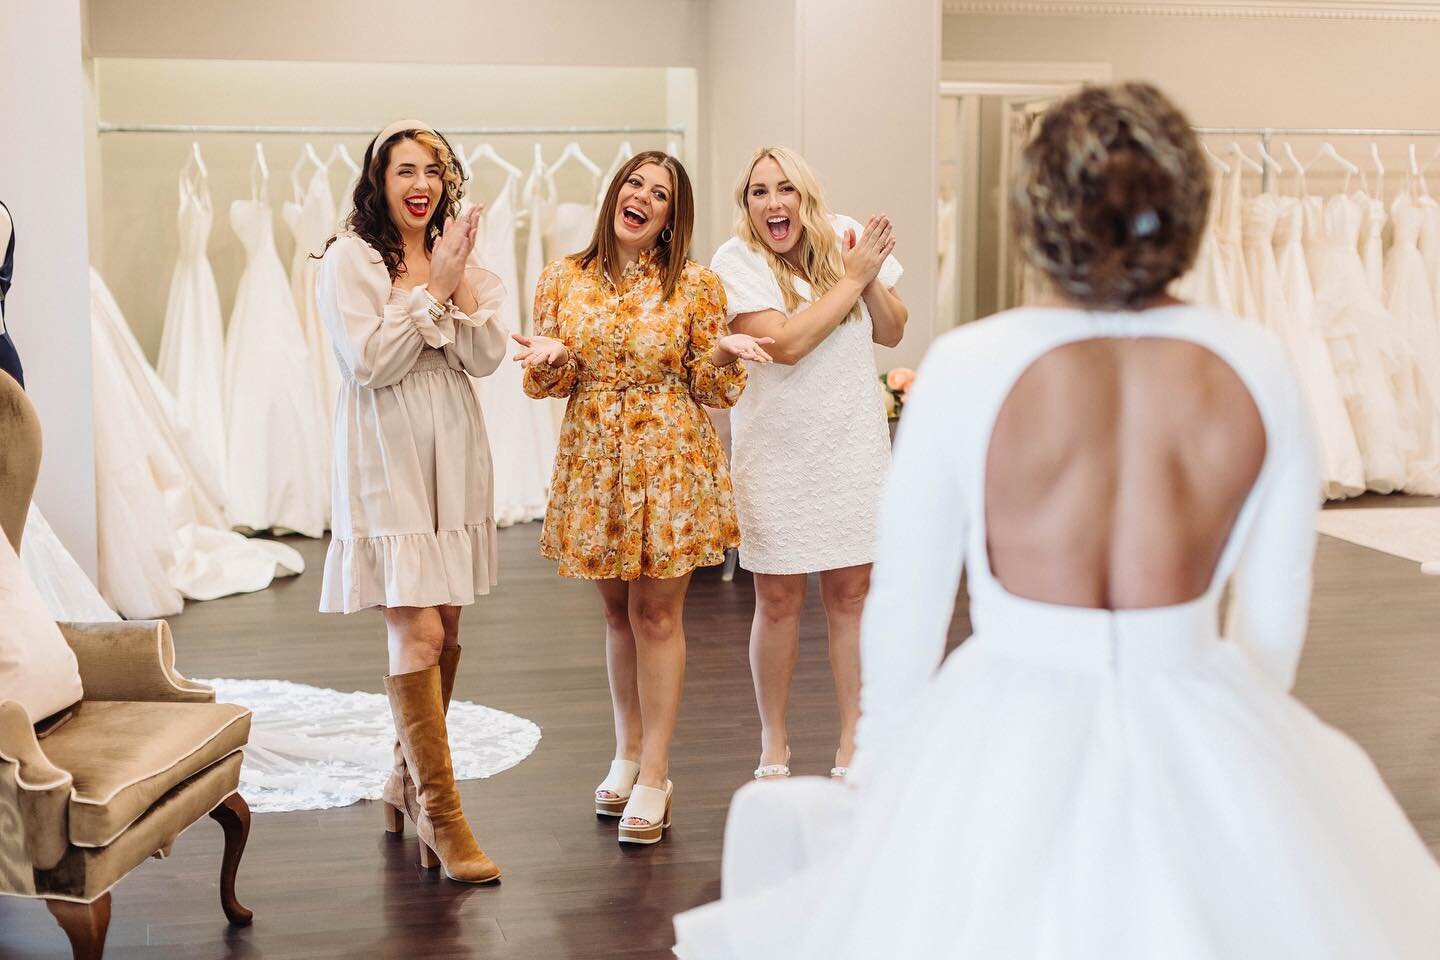 Cheers To The Weekend 🥂
 
But Mostly&hellip;.

Cheers To Saying Yes To The Dress 🥂

It&rsquo;s Friday-Eve &amp; The Gown Girls are gearing up for our favorite day! 🗓️

The floor is stocked with New Arrivals and we can&rsquo;t wait to show you what